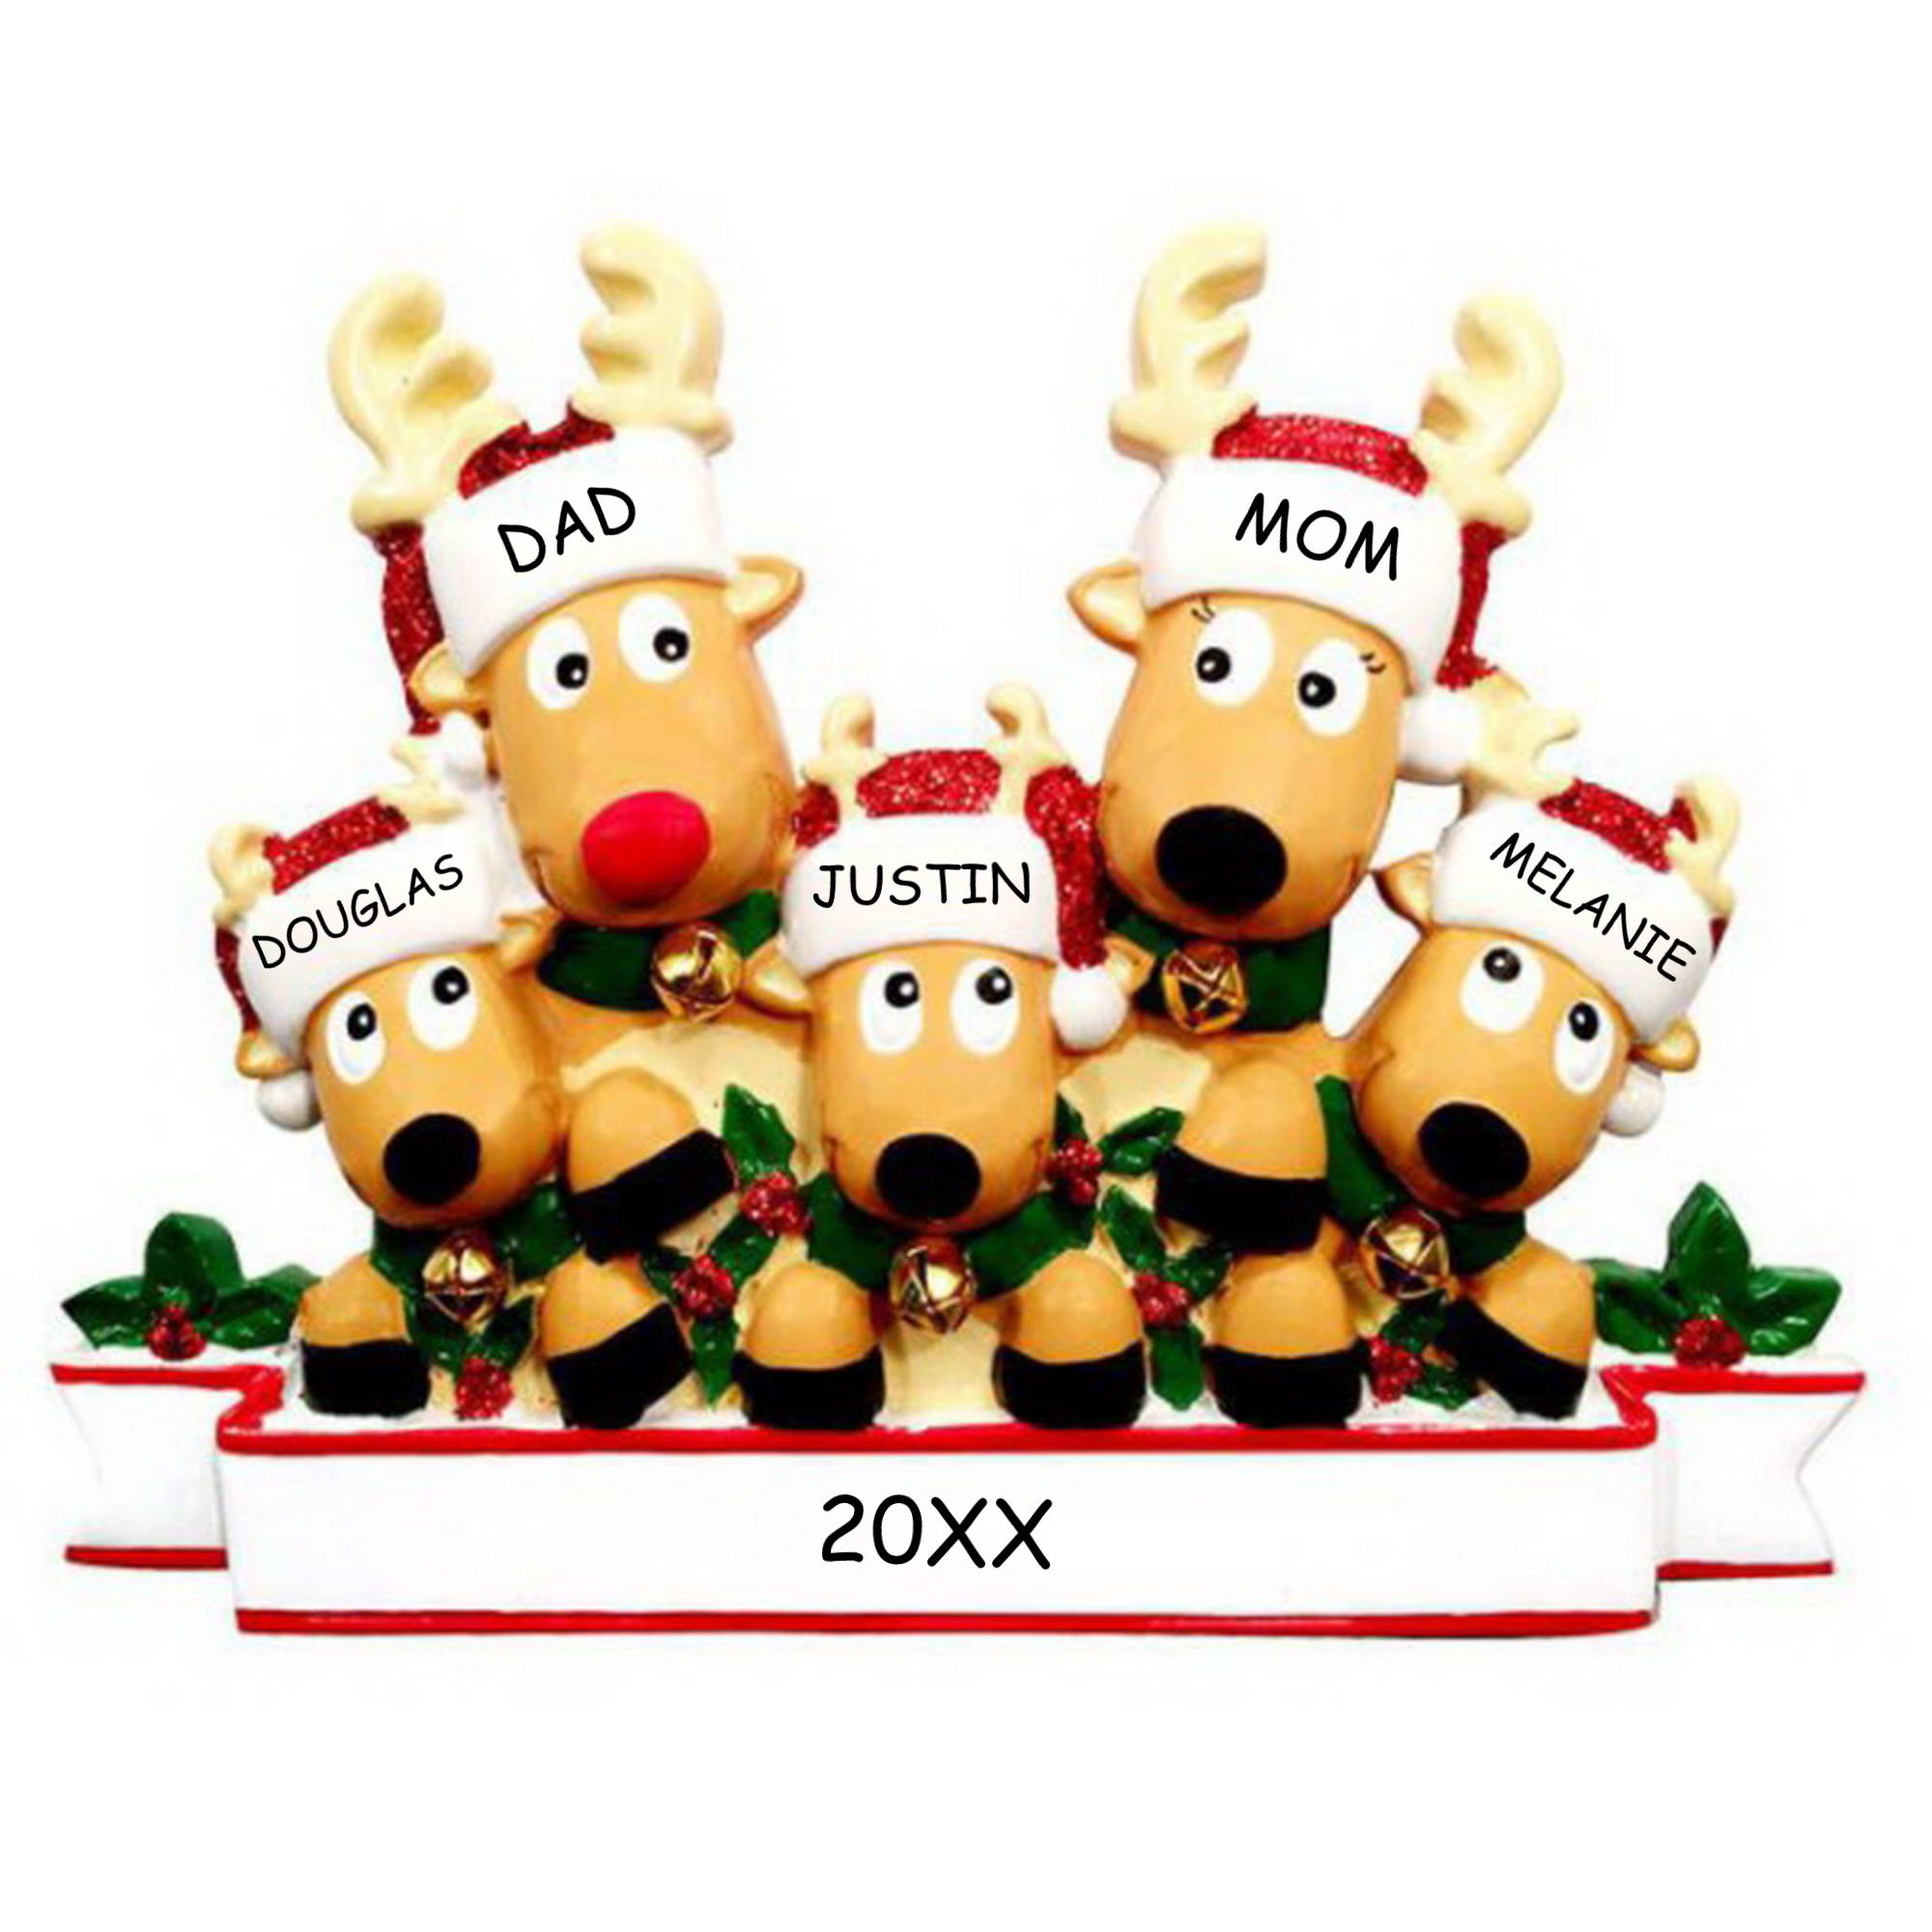 Personalized Cozy Reindeer Christmas Ornament - Family of 5